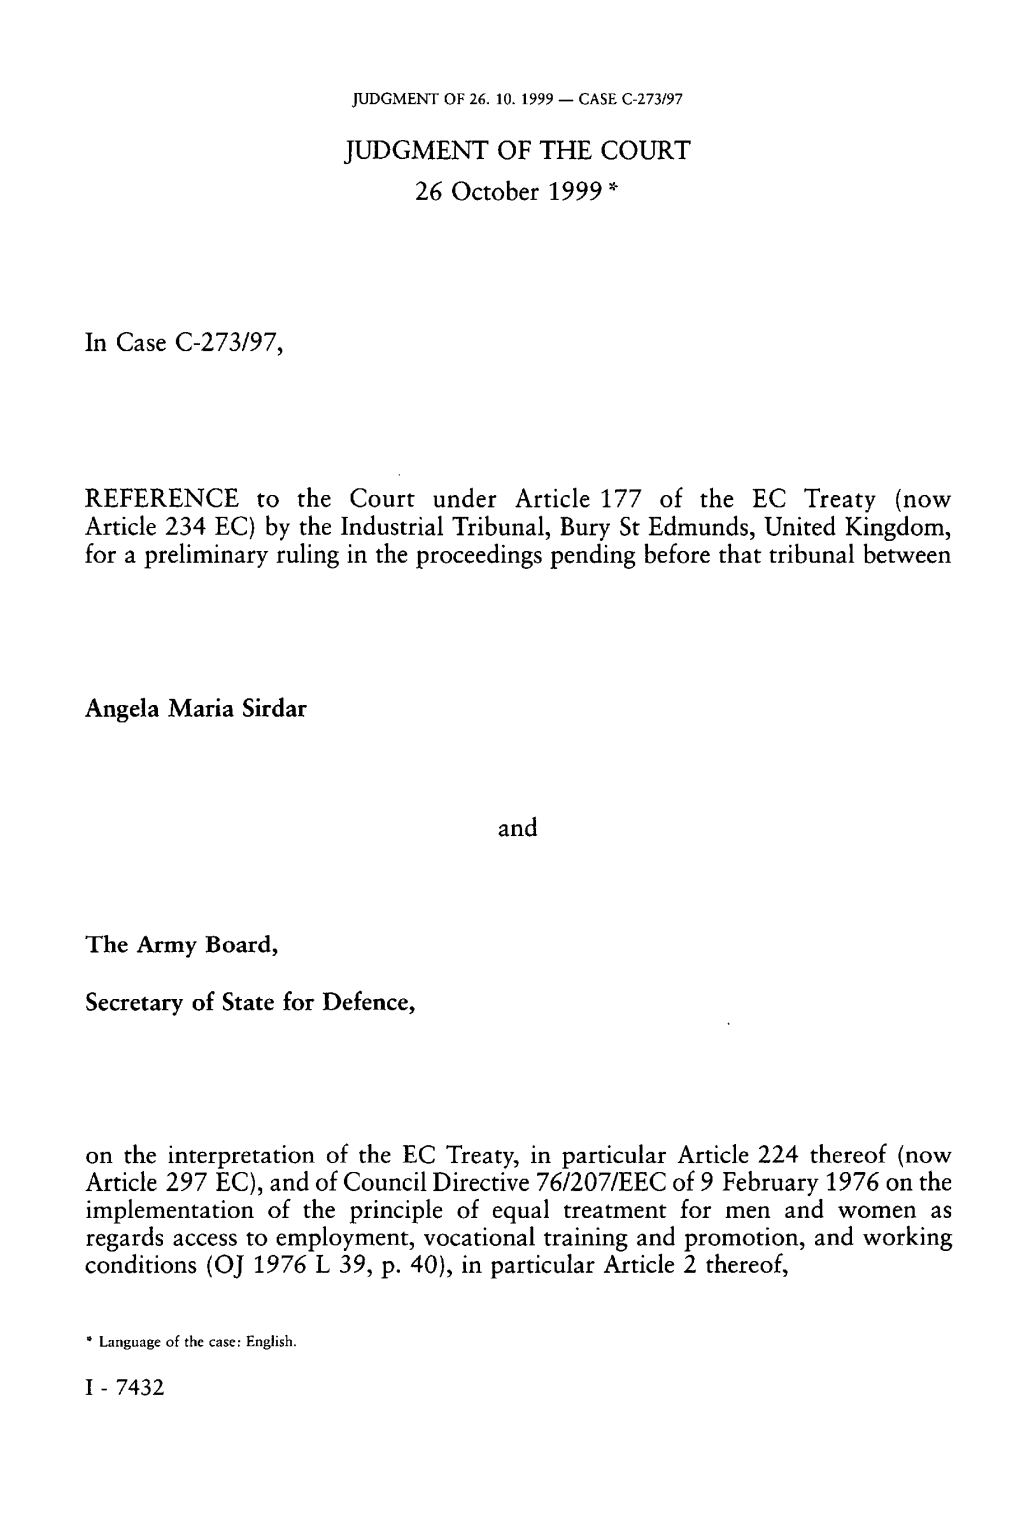 JUDGMENT of the COURT 26 October 1999 * in Case